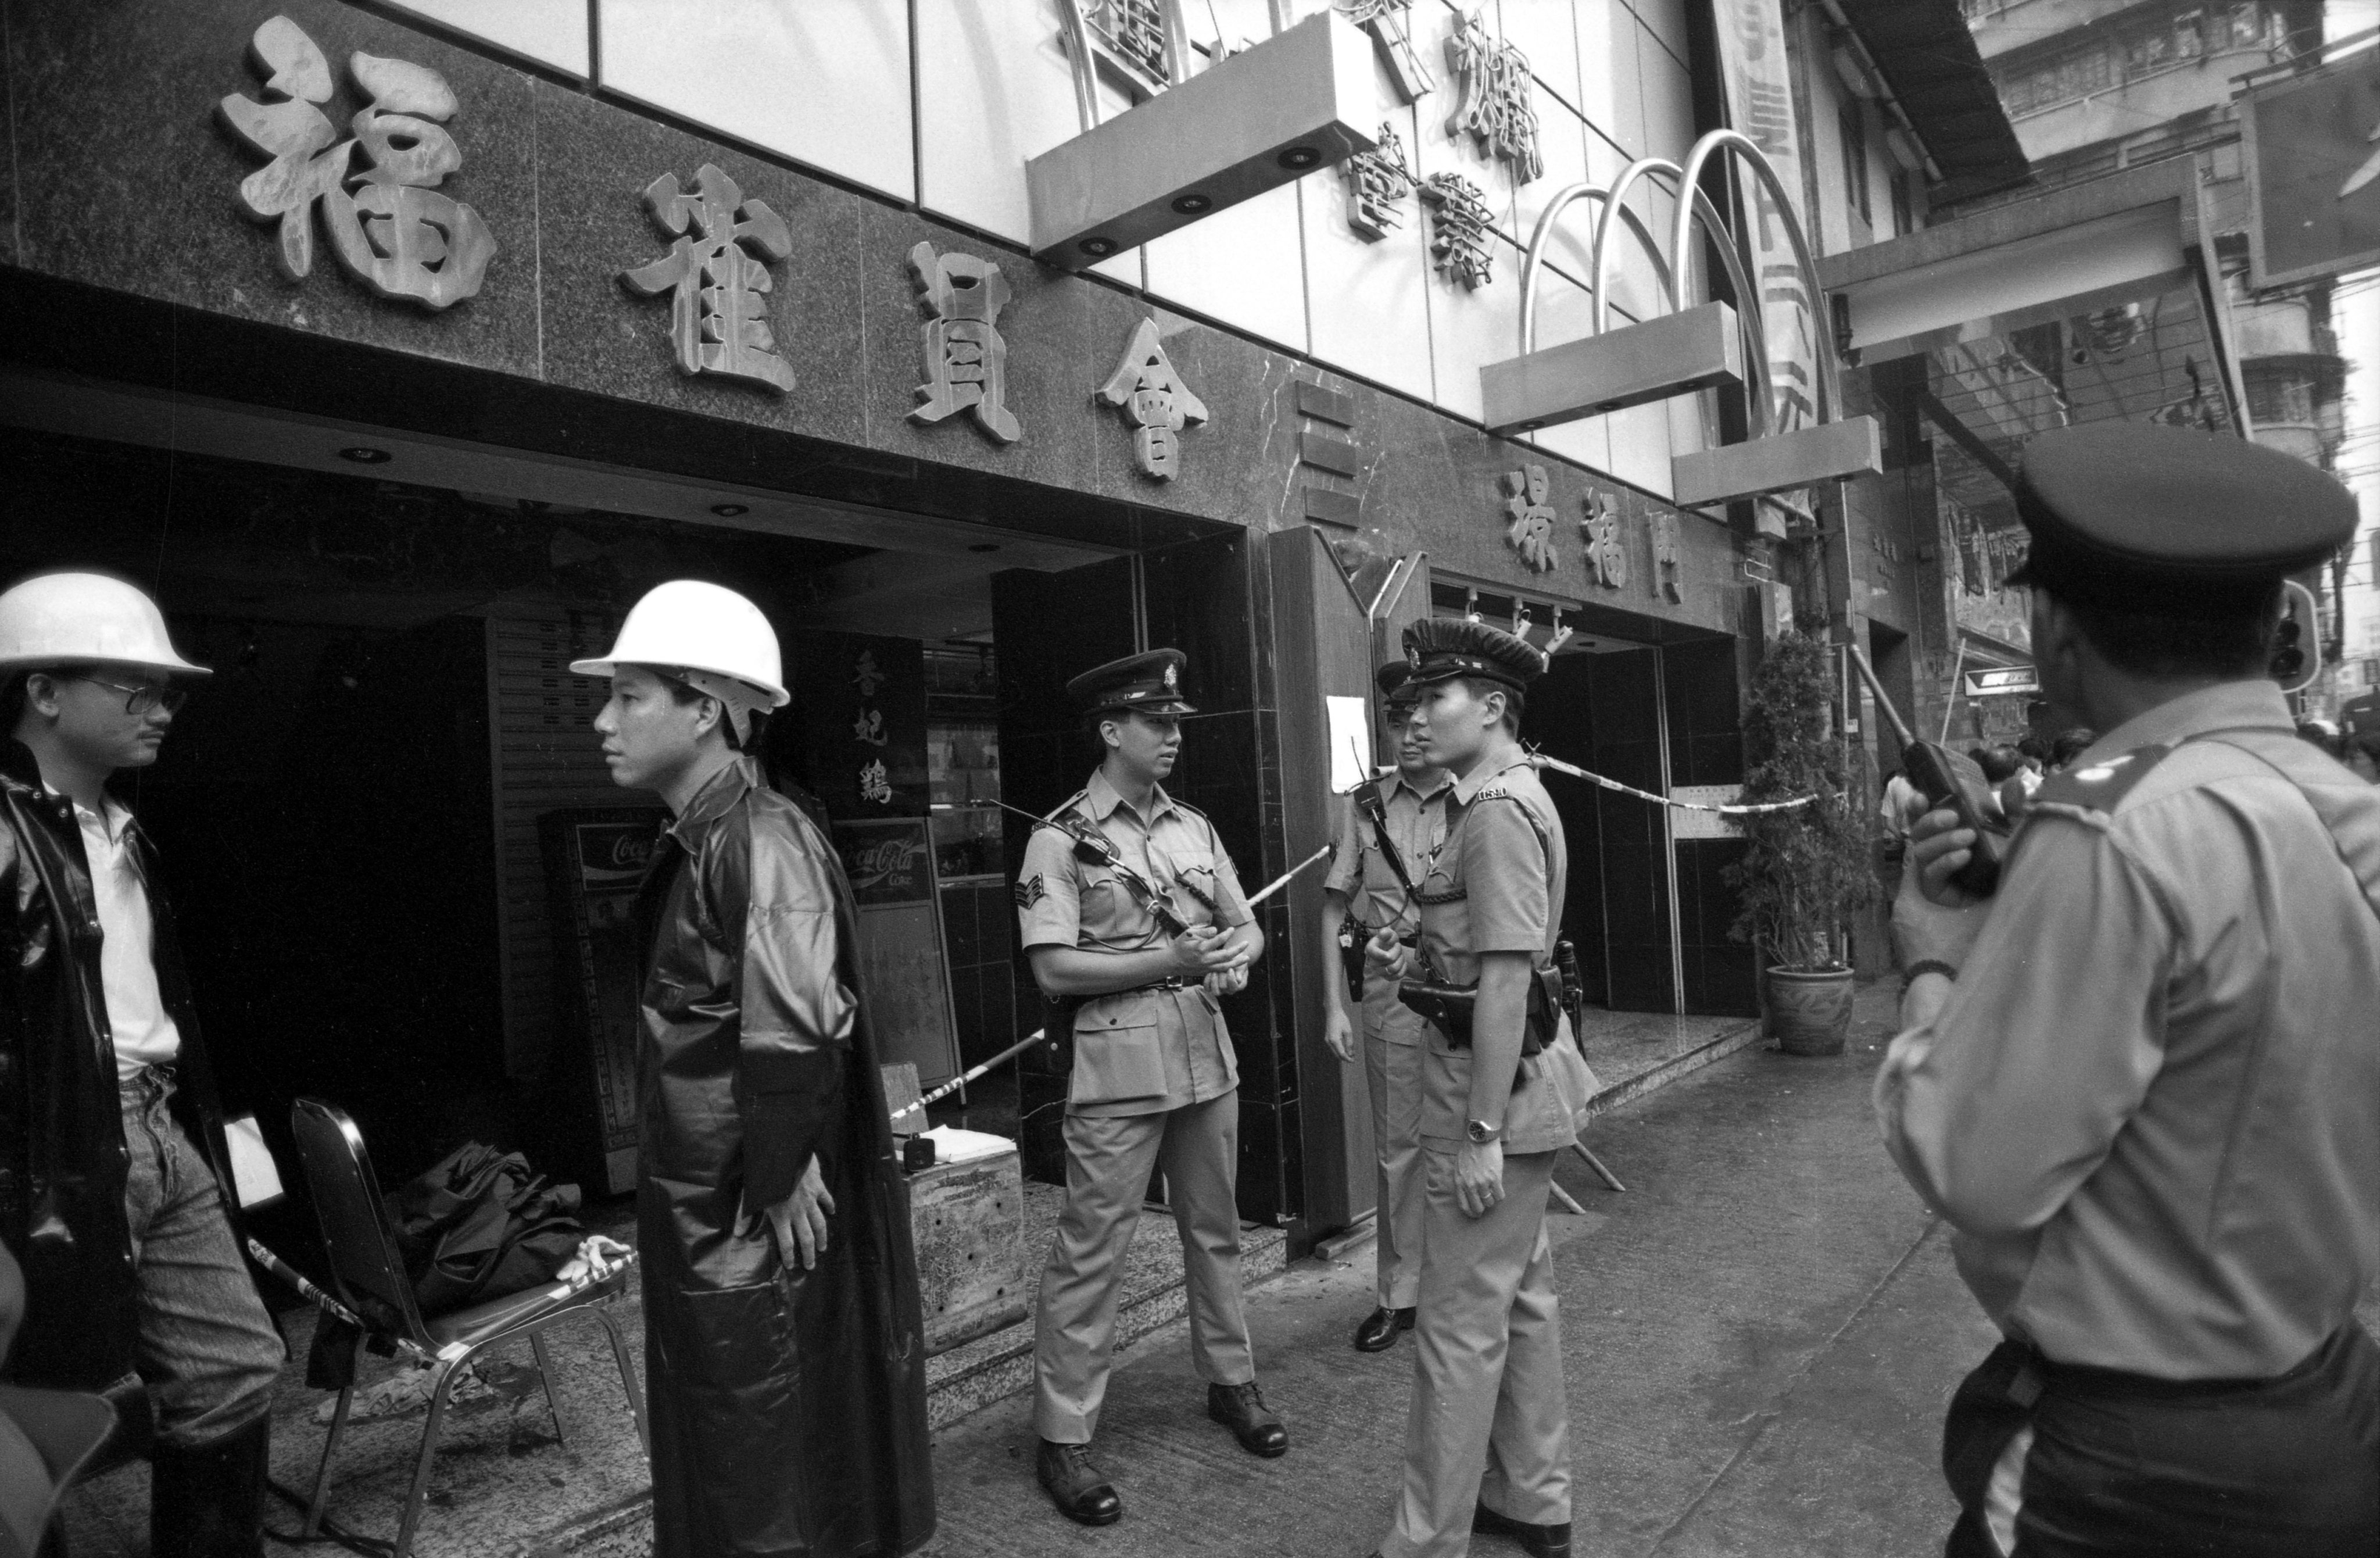 A Hong Kong restaurant and mahjong club was firebombed in 1990, after refusing to pay local gangsters. Six men, including three shareholders in the King Ford Moon Restaurant and Mahjong Club (above) were killed. Photo: SCMP